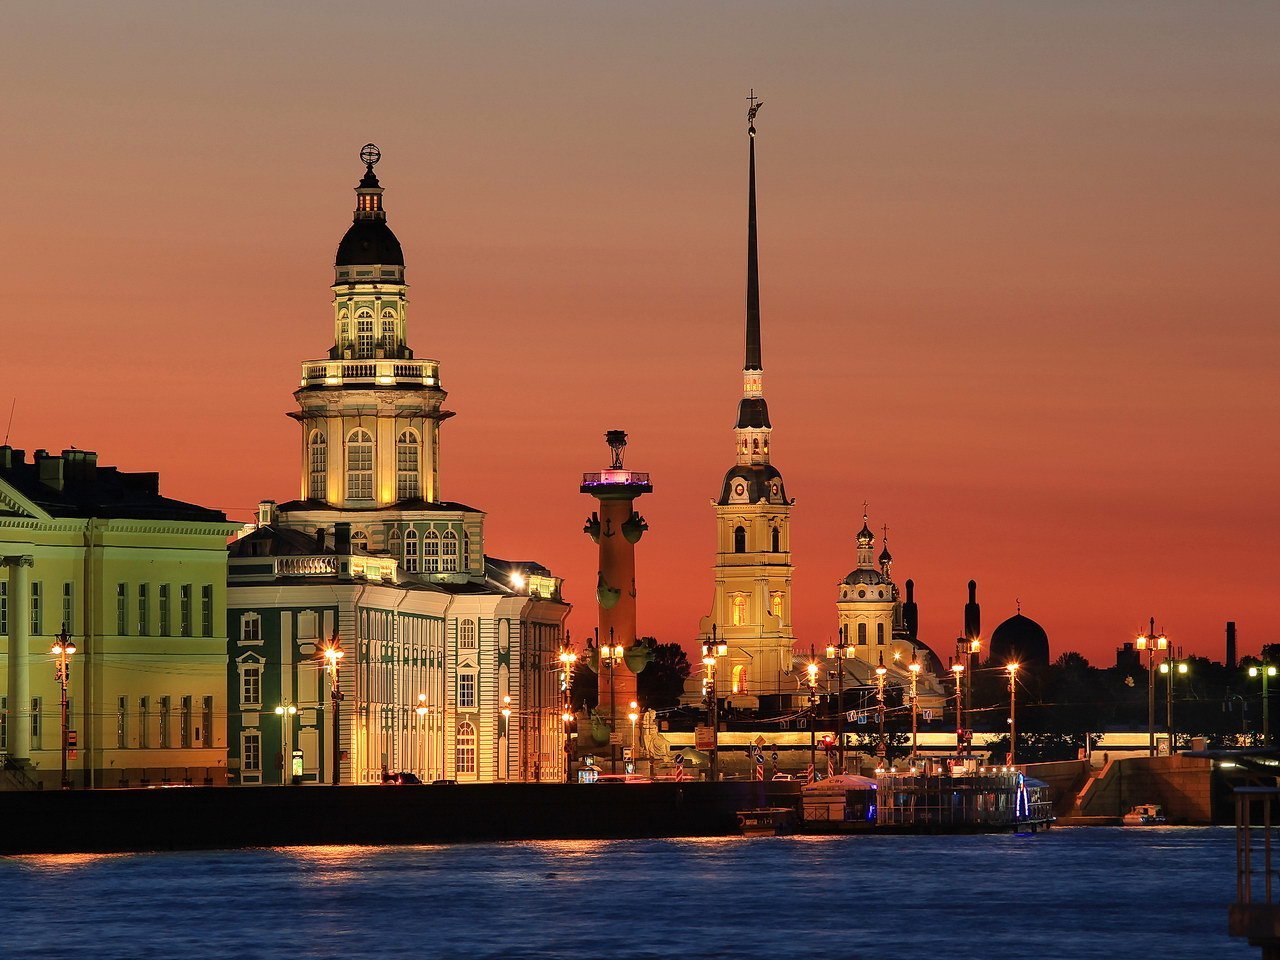 Old St. Petersburg Stock Exchange and Rostral Columns jigsaw puzzle